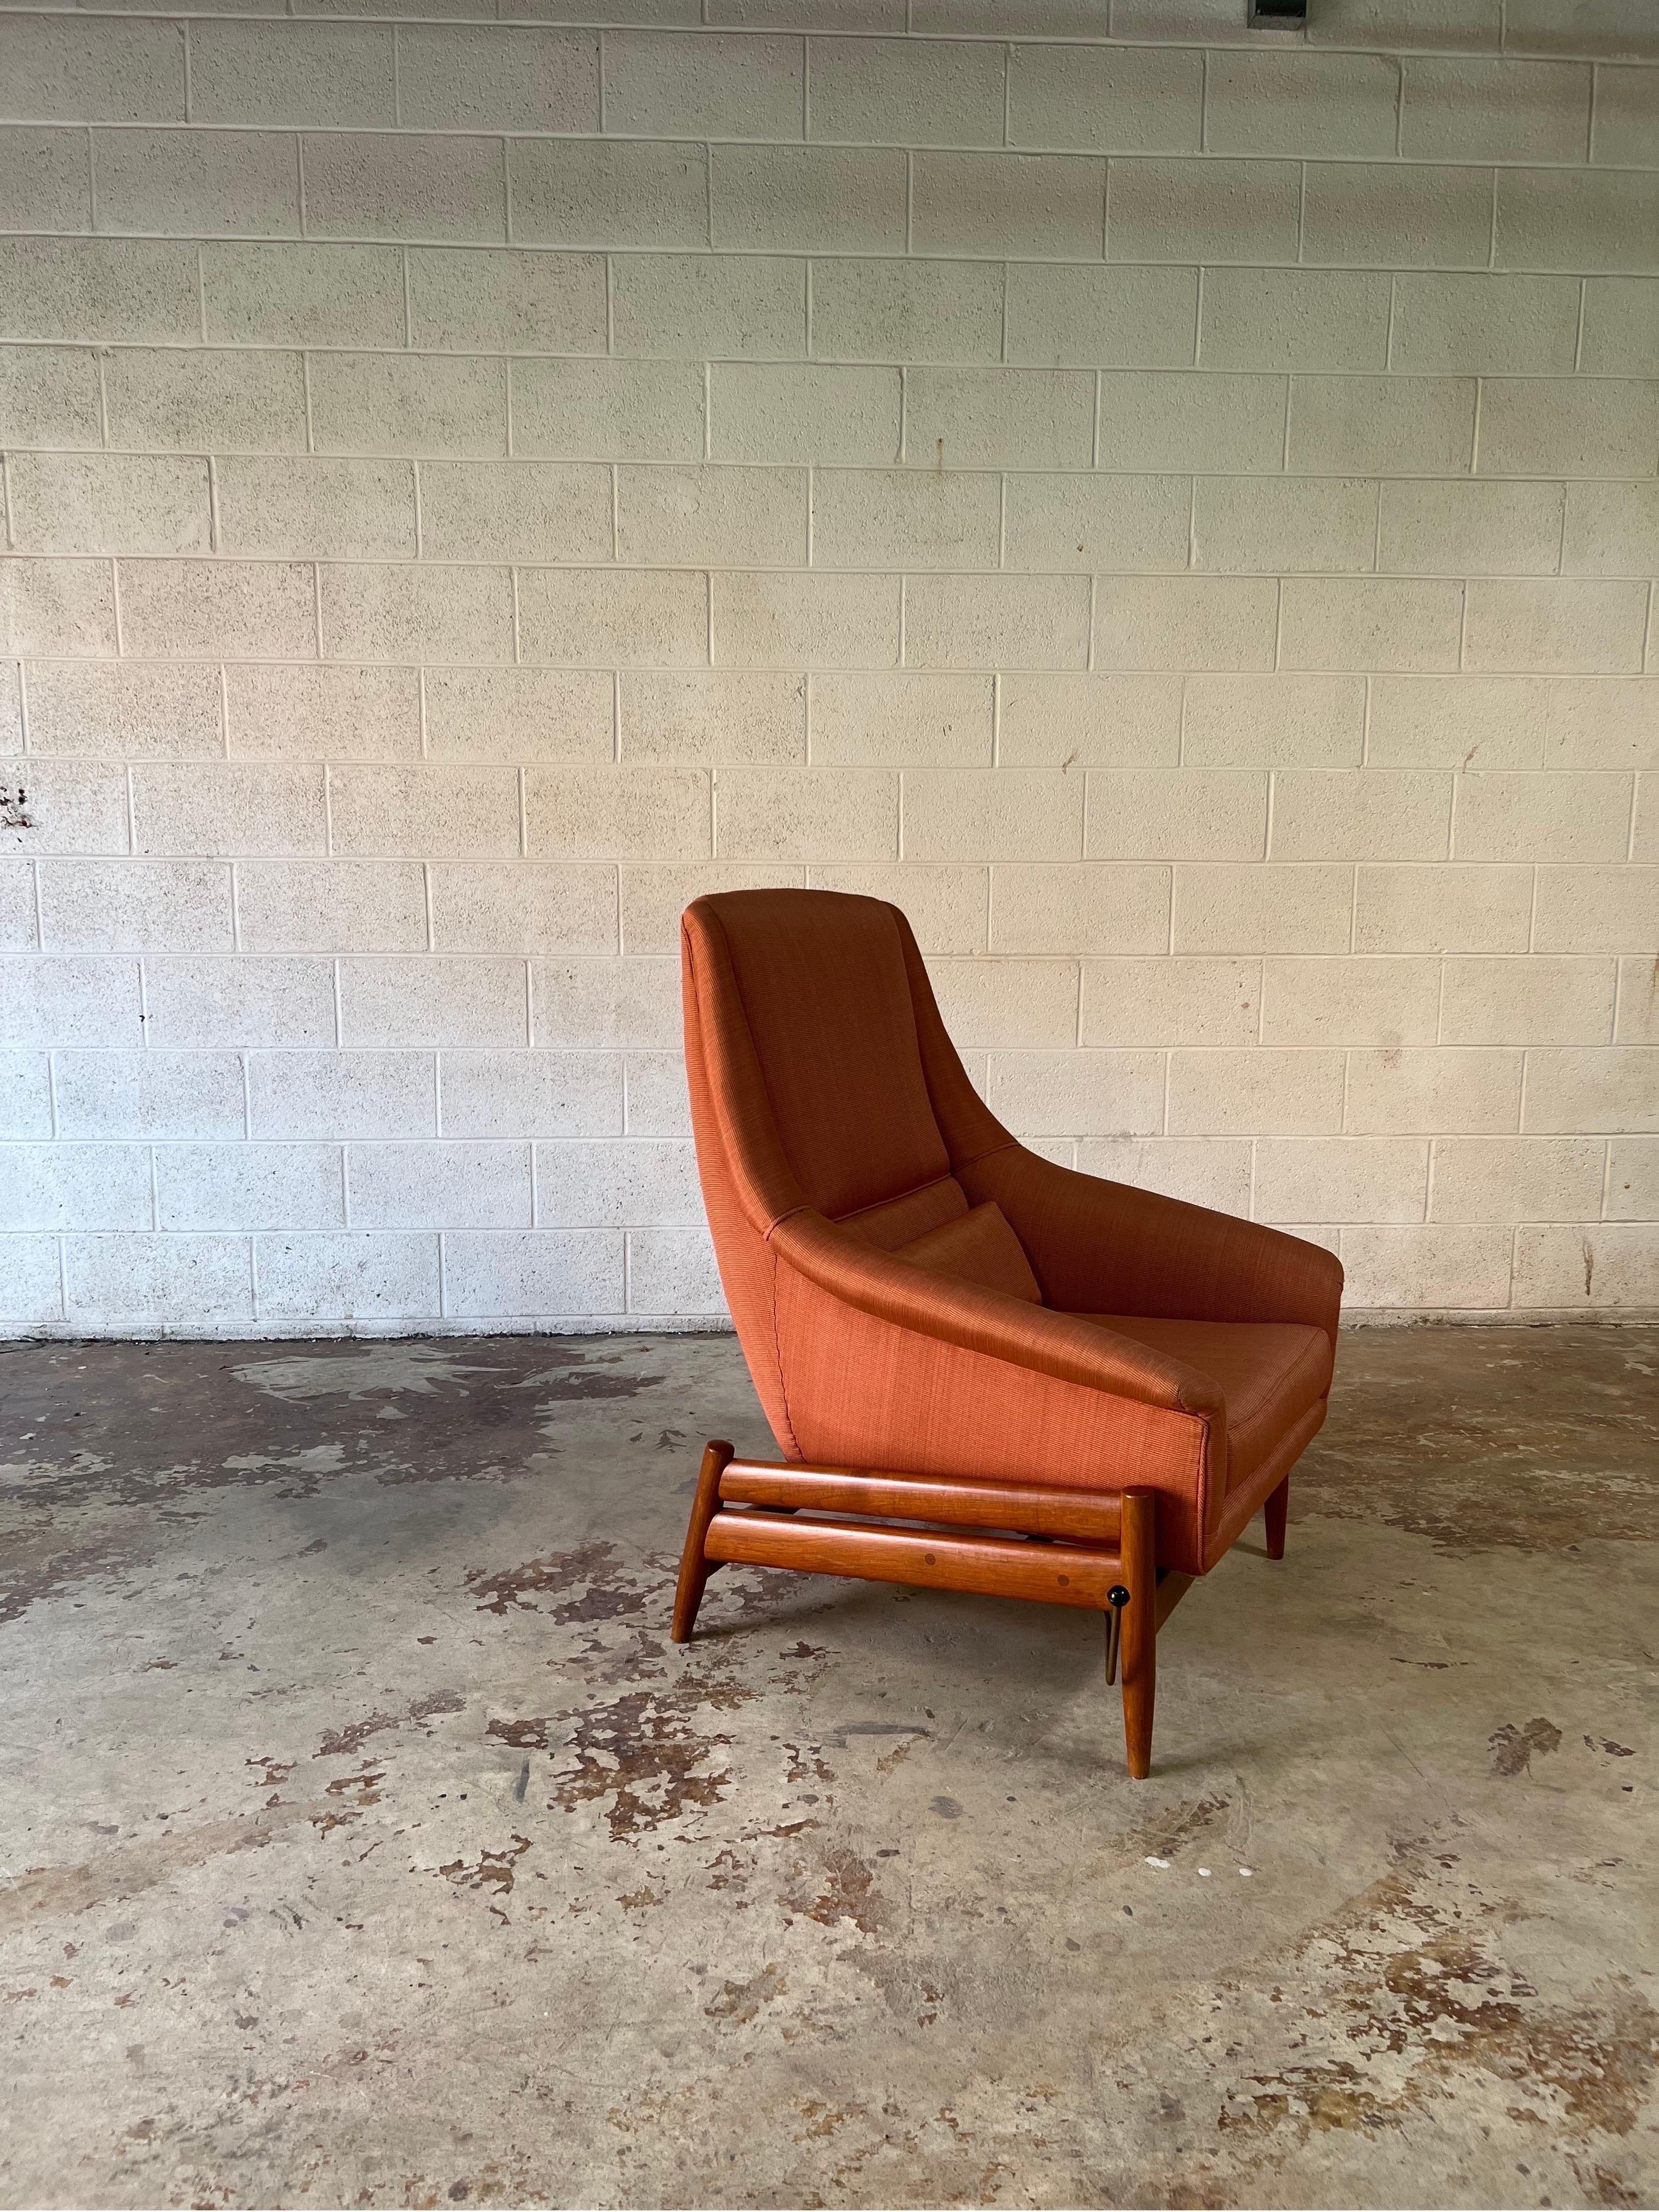 Teak rocker / recliner by L.K. Hjelle, Norway circa 1960’s This 1960s chair has three adjustable seating positions controlled by the visible side lever. The chair sits on a beautifully crafted teak frame. The upholstery is a light pink or salmon